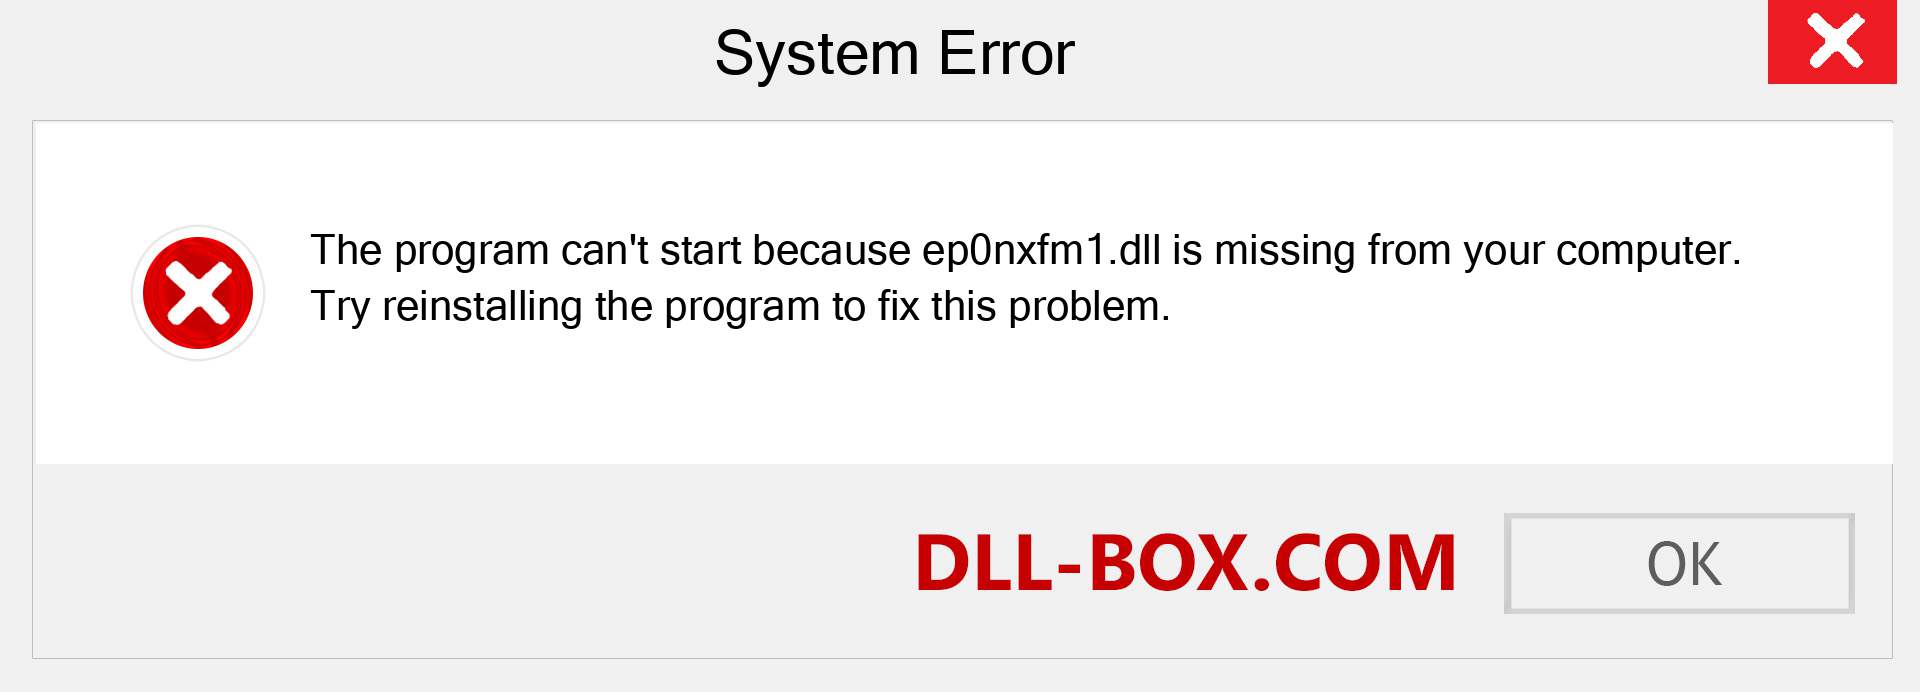  ep0nxfm1.dll file is missing?. Download for Windows 7, 8, 10 - Fix  ep0nxfm1 dll Missing Error on Windows, photos, images